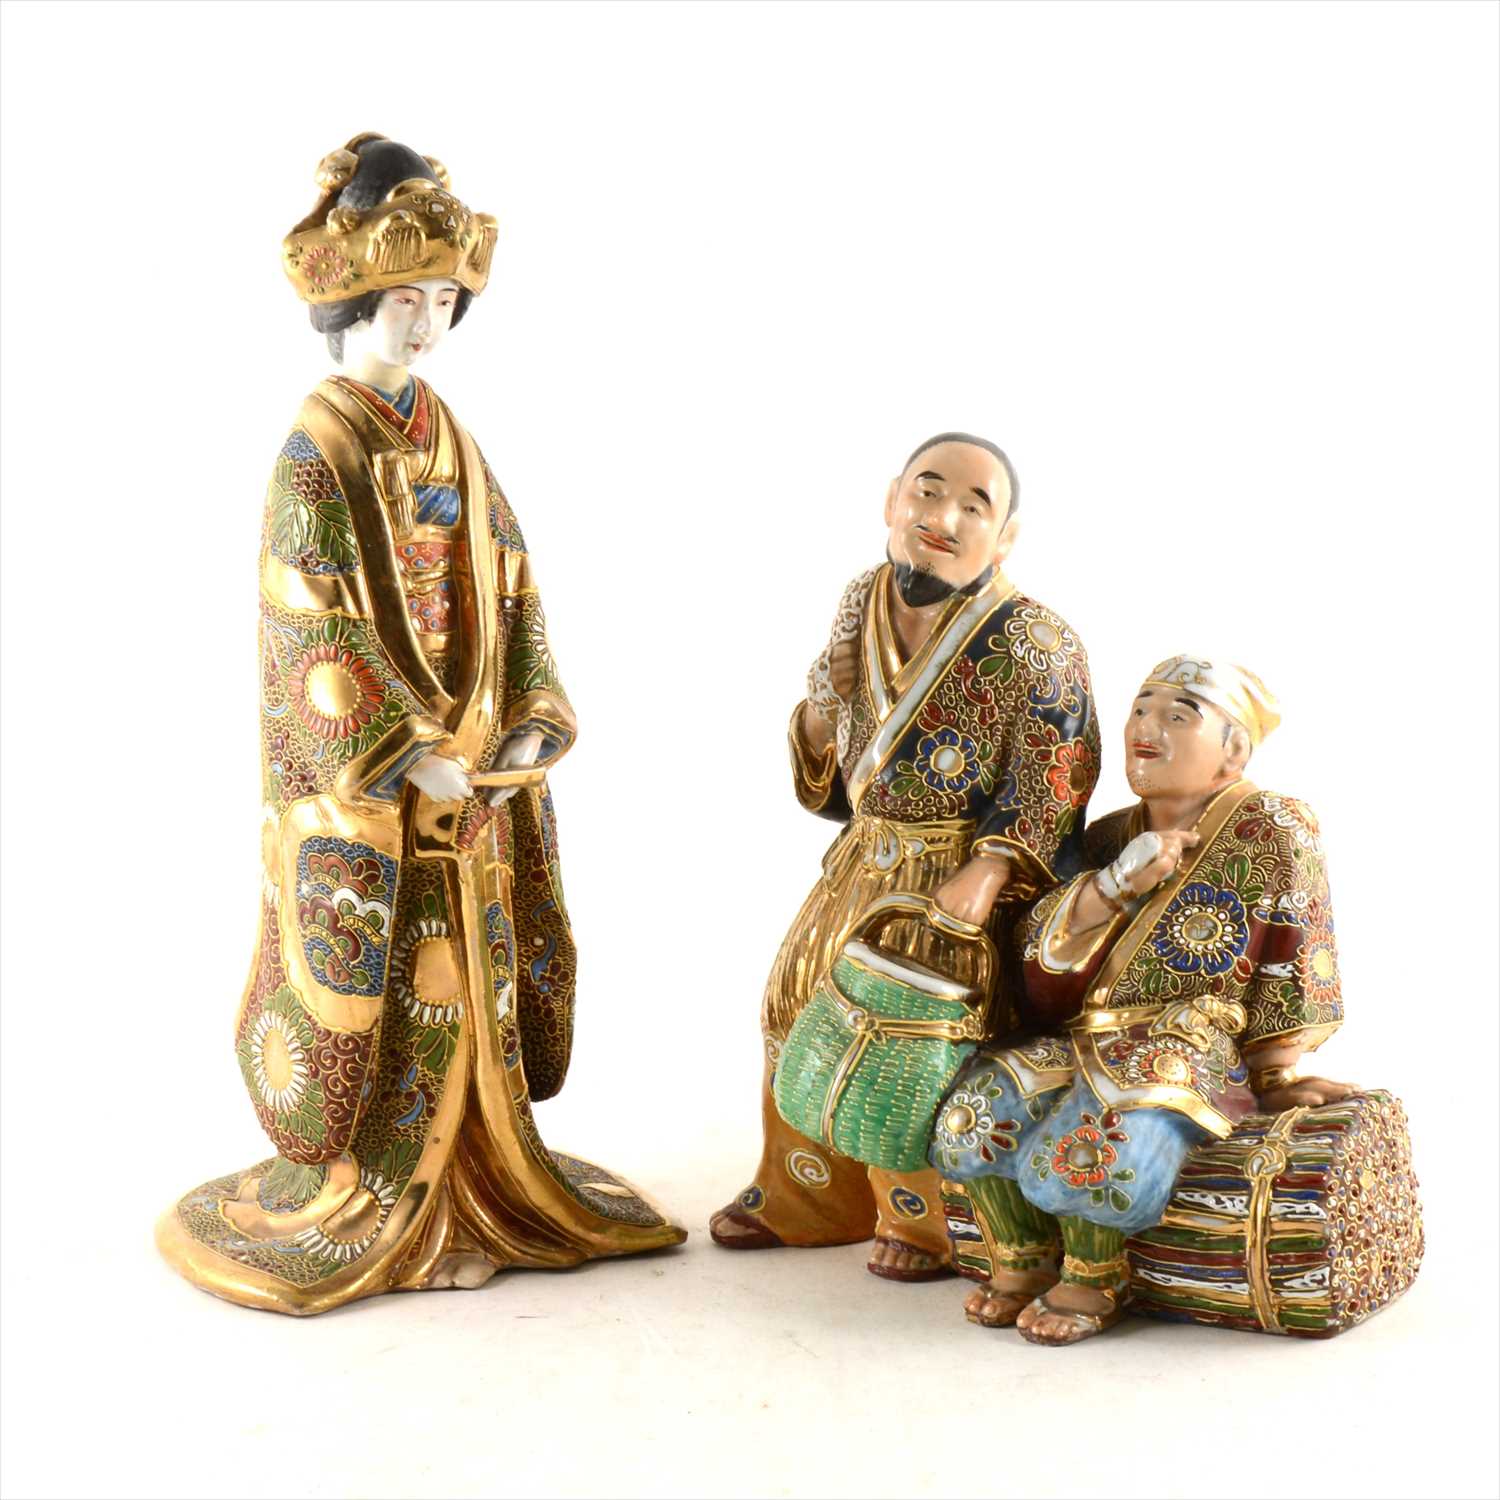 Lot 26 - Japanese Karga type group of two figures, and a figure of a Geisha